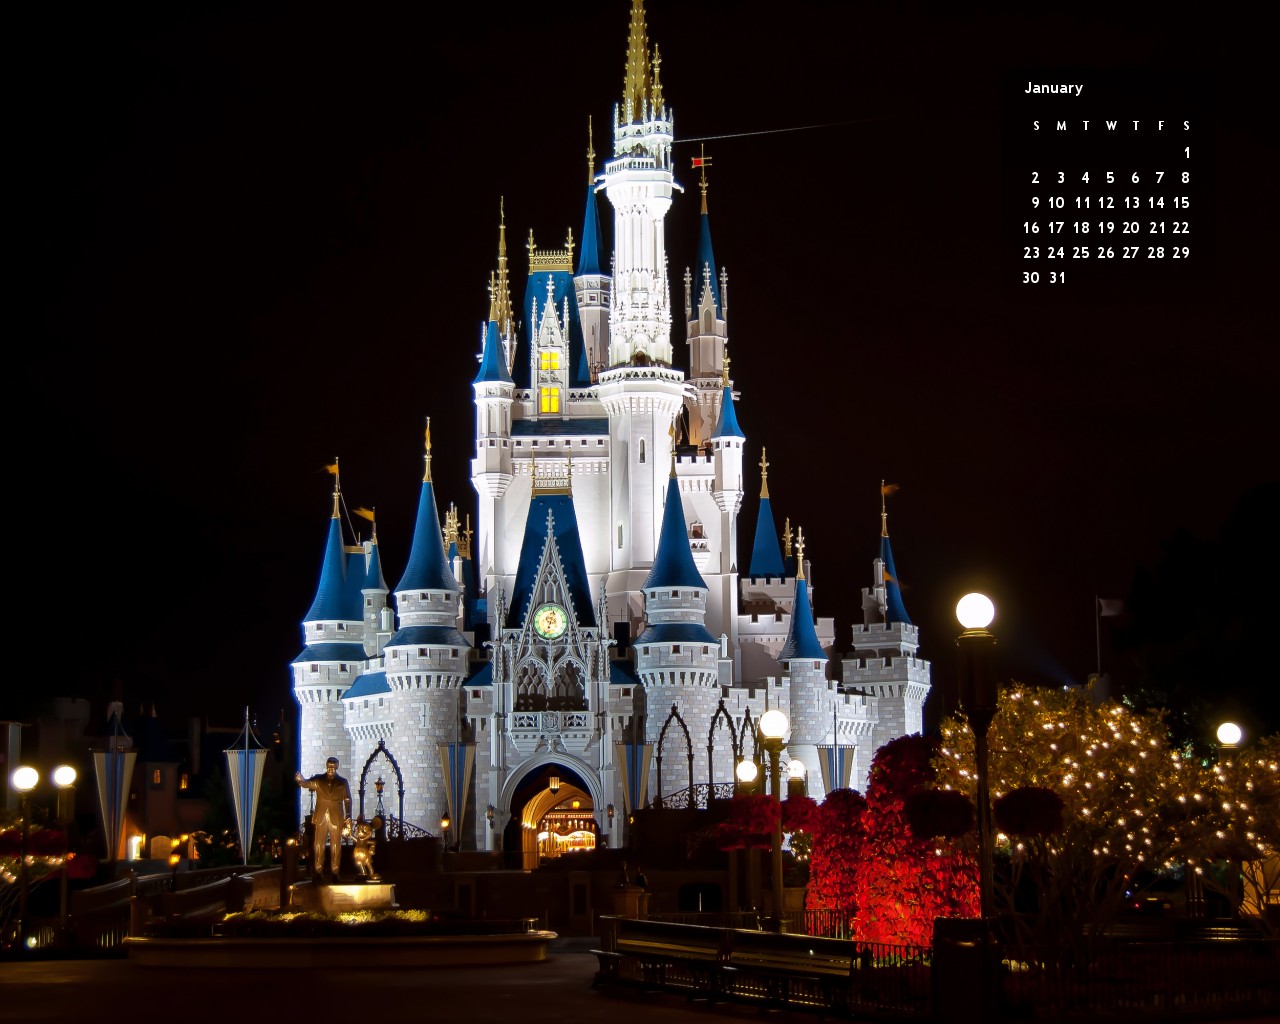 January Disney World Calendar Picture This